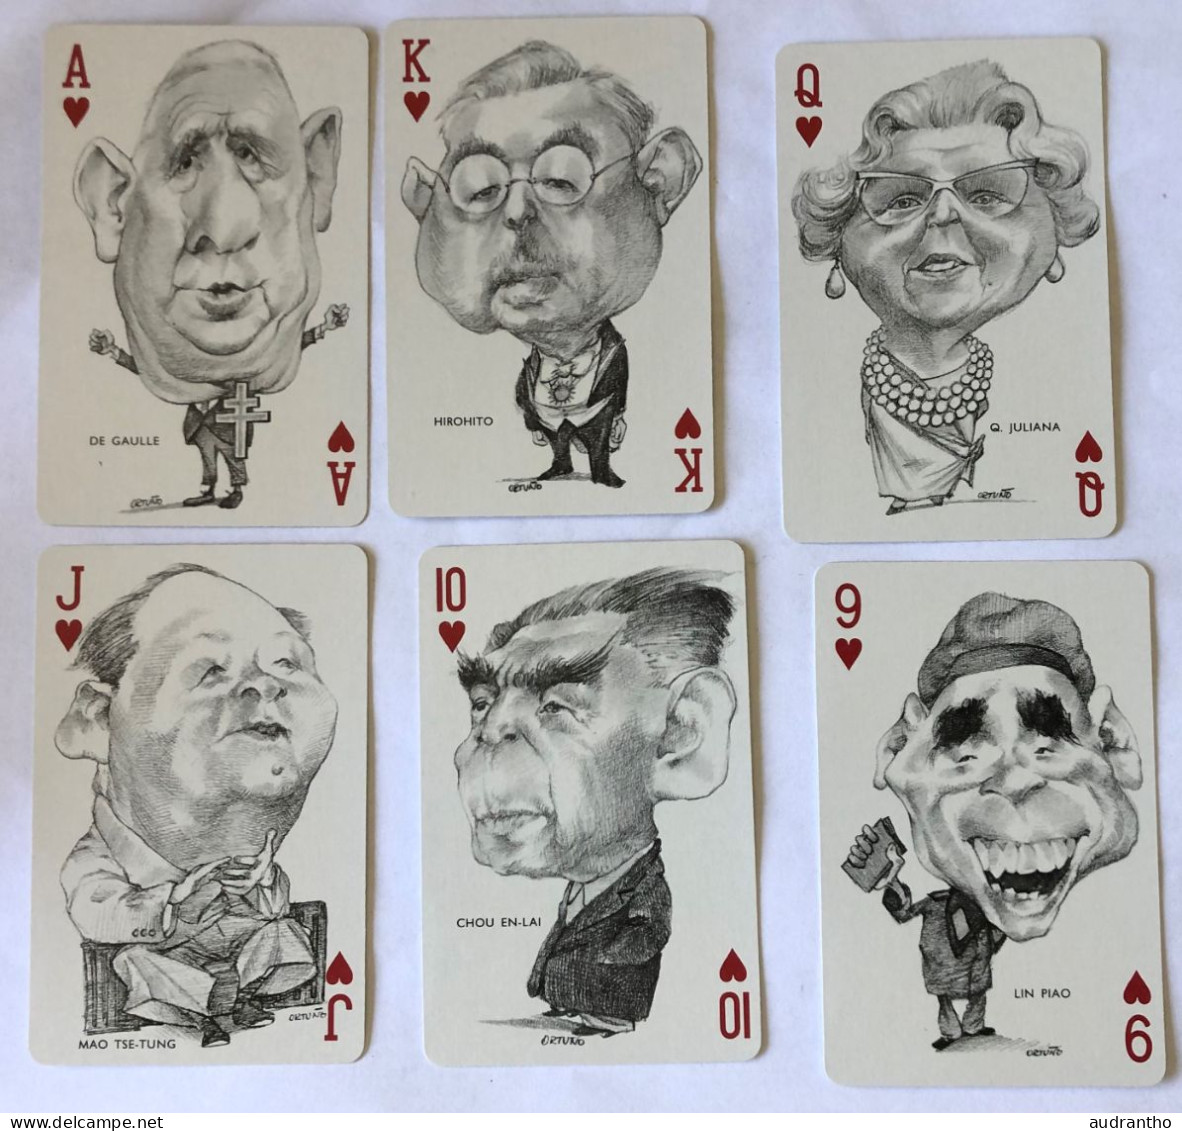 très beau double jeu 54 cartes 1973 - caricature personnalité - political twin pack playing cards by ORTUNO - Erric Sio